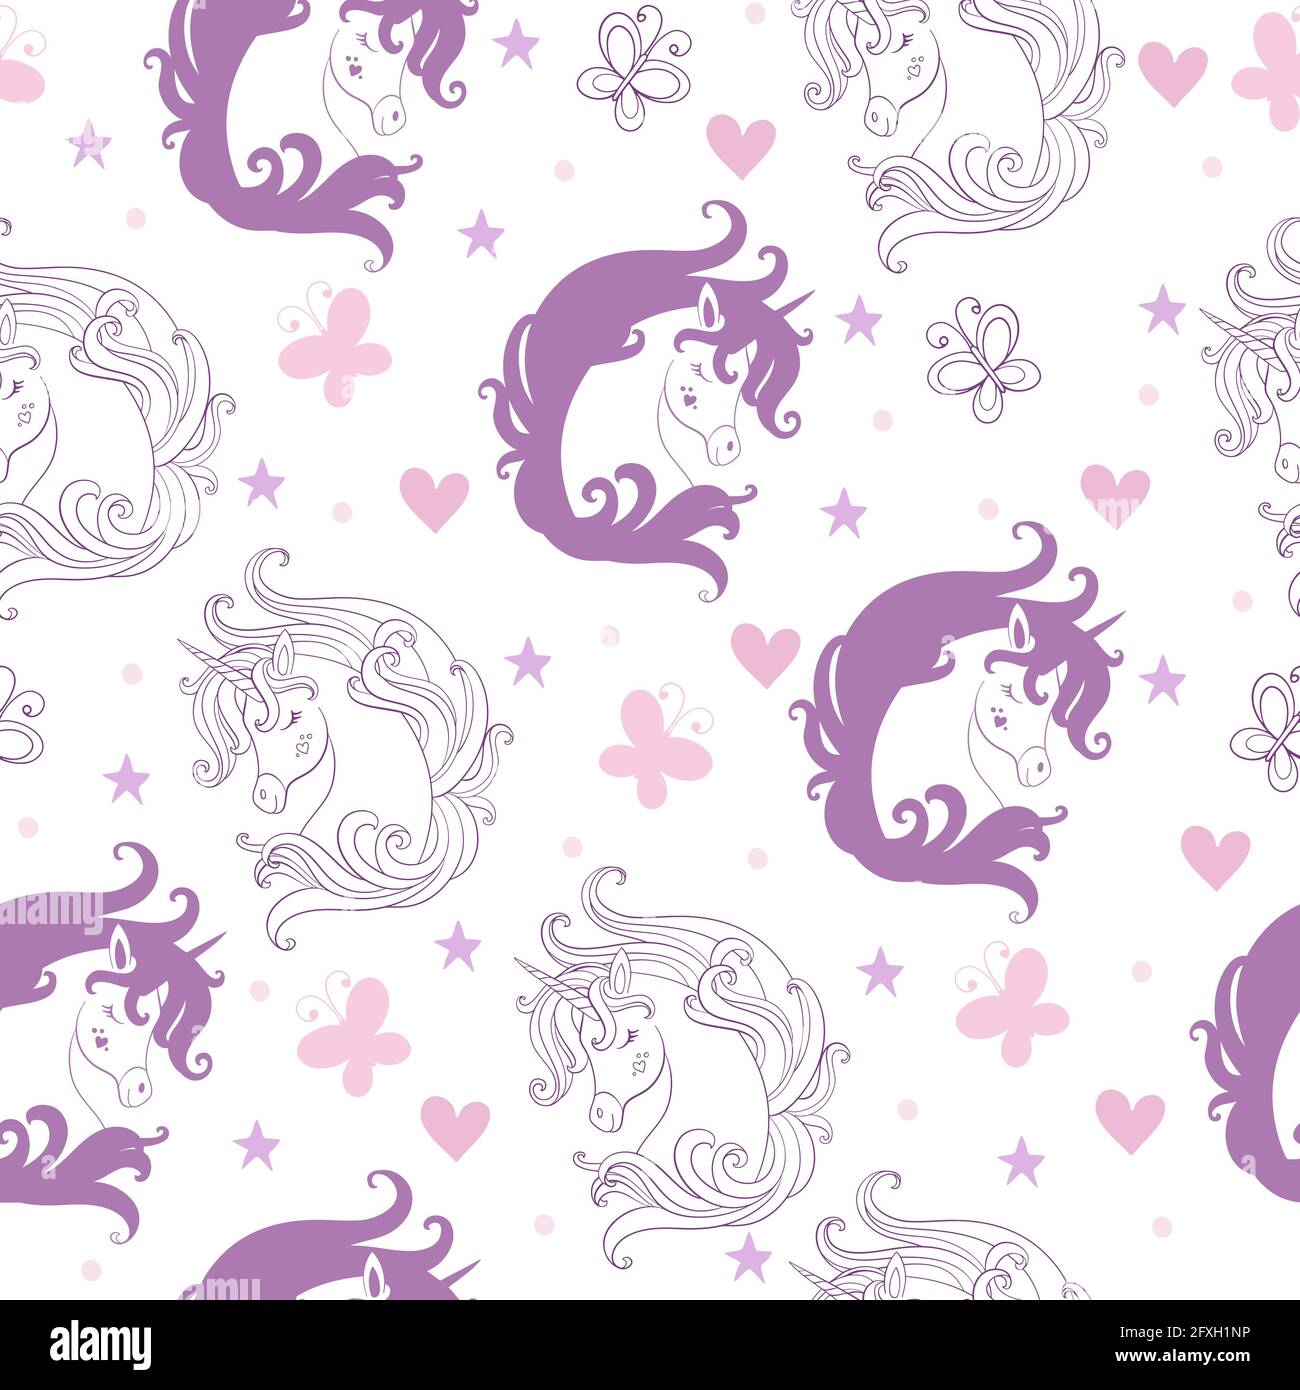 Seamless pattern with contour unicorns heads on white background. Vector illustration for party, print, baby shower, wallpaper, design, decor, childre Stock Vector